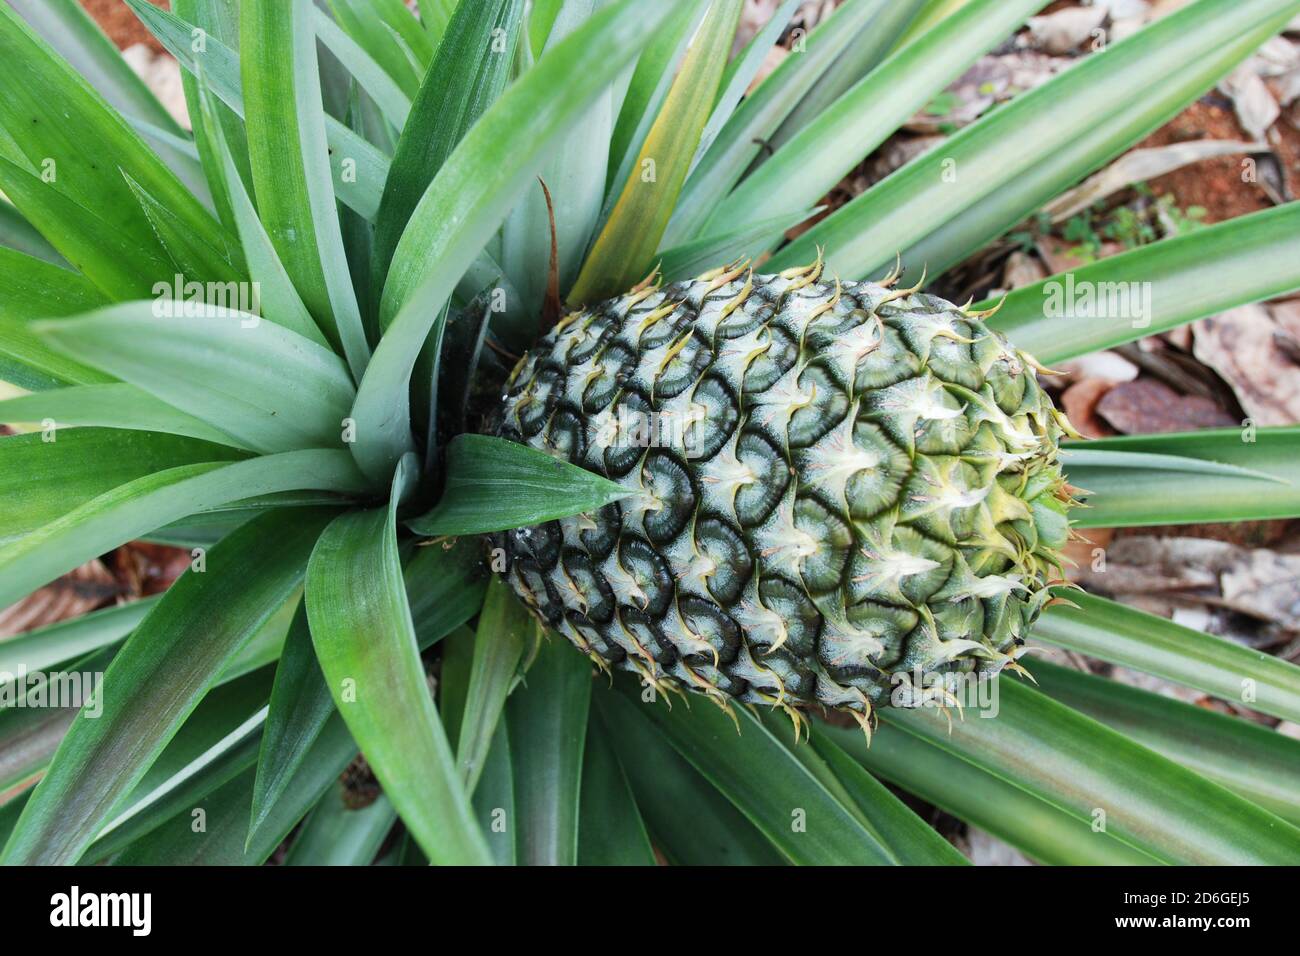 Pineapple tropical fruit growing in a plantation Stock Photo